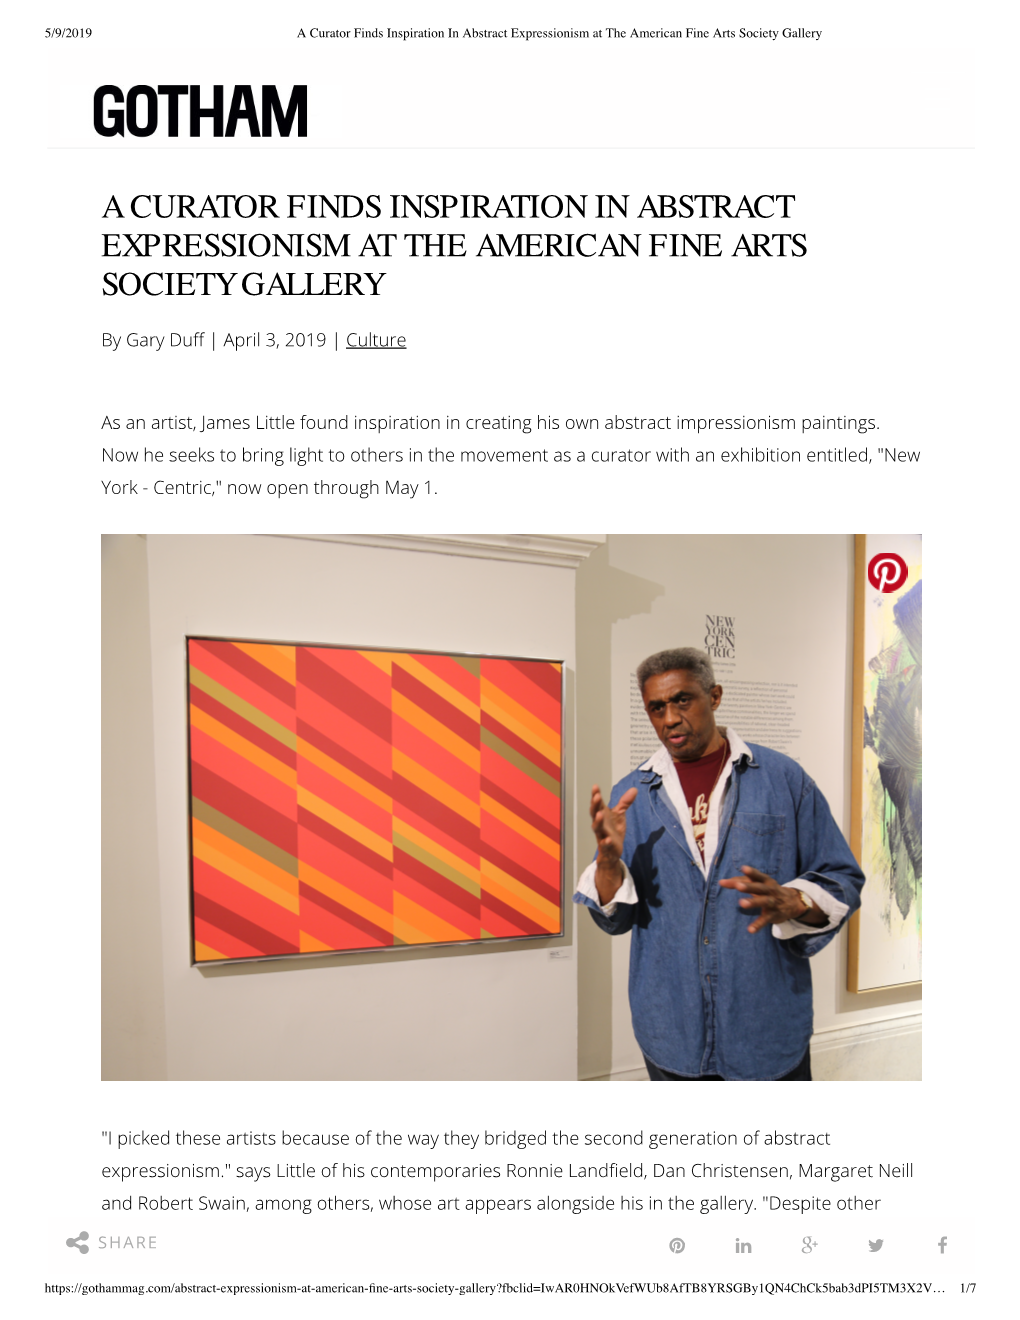 A Curator Finds Inspiration in Abstract...The American Fine Arts